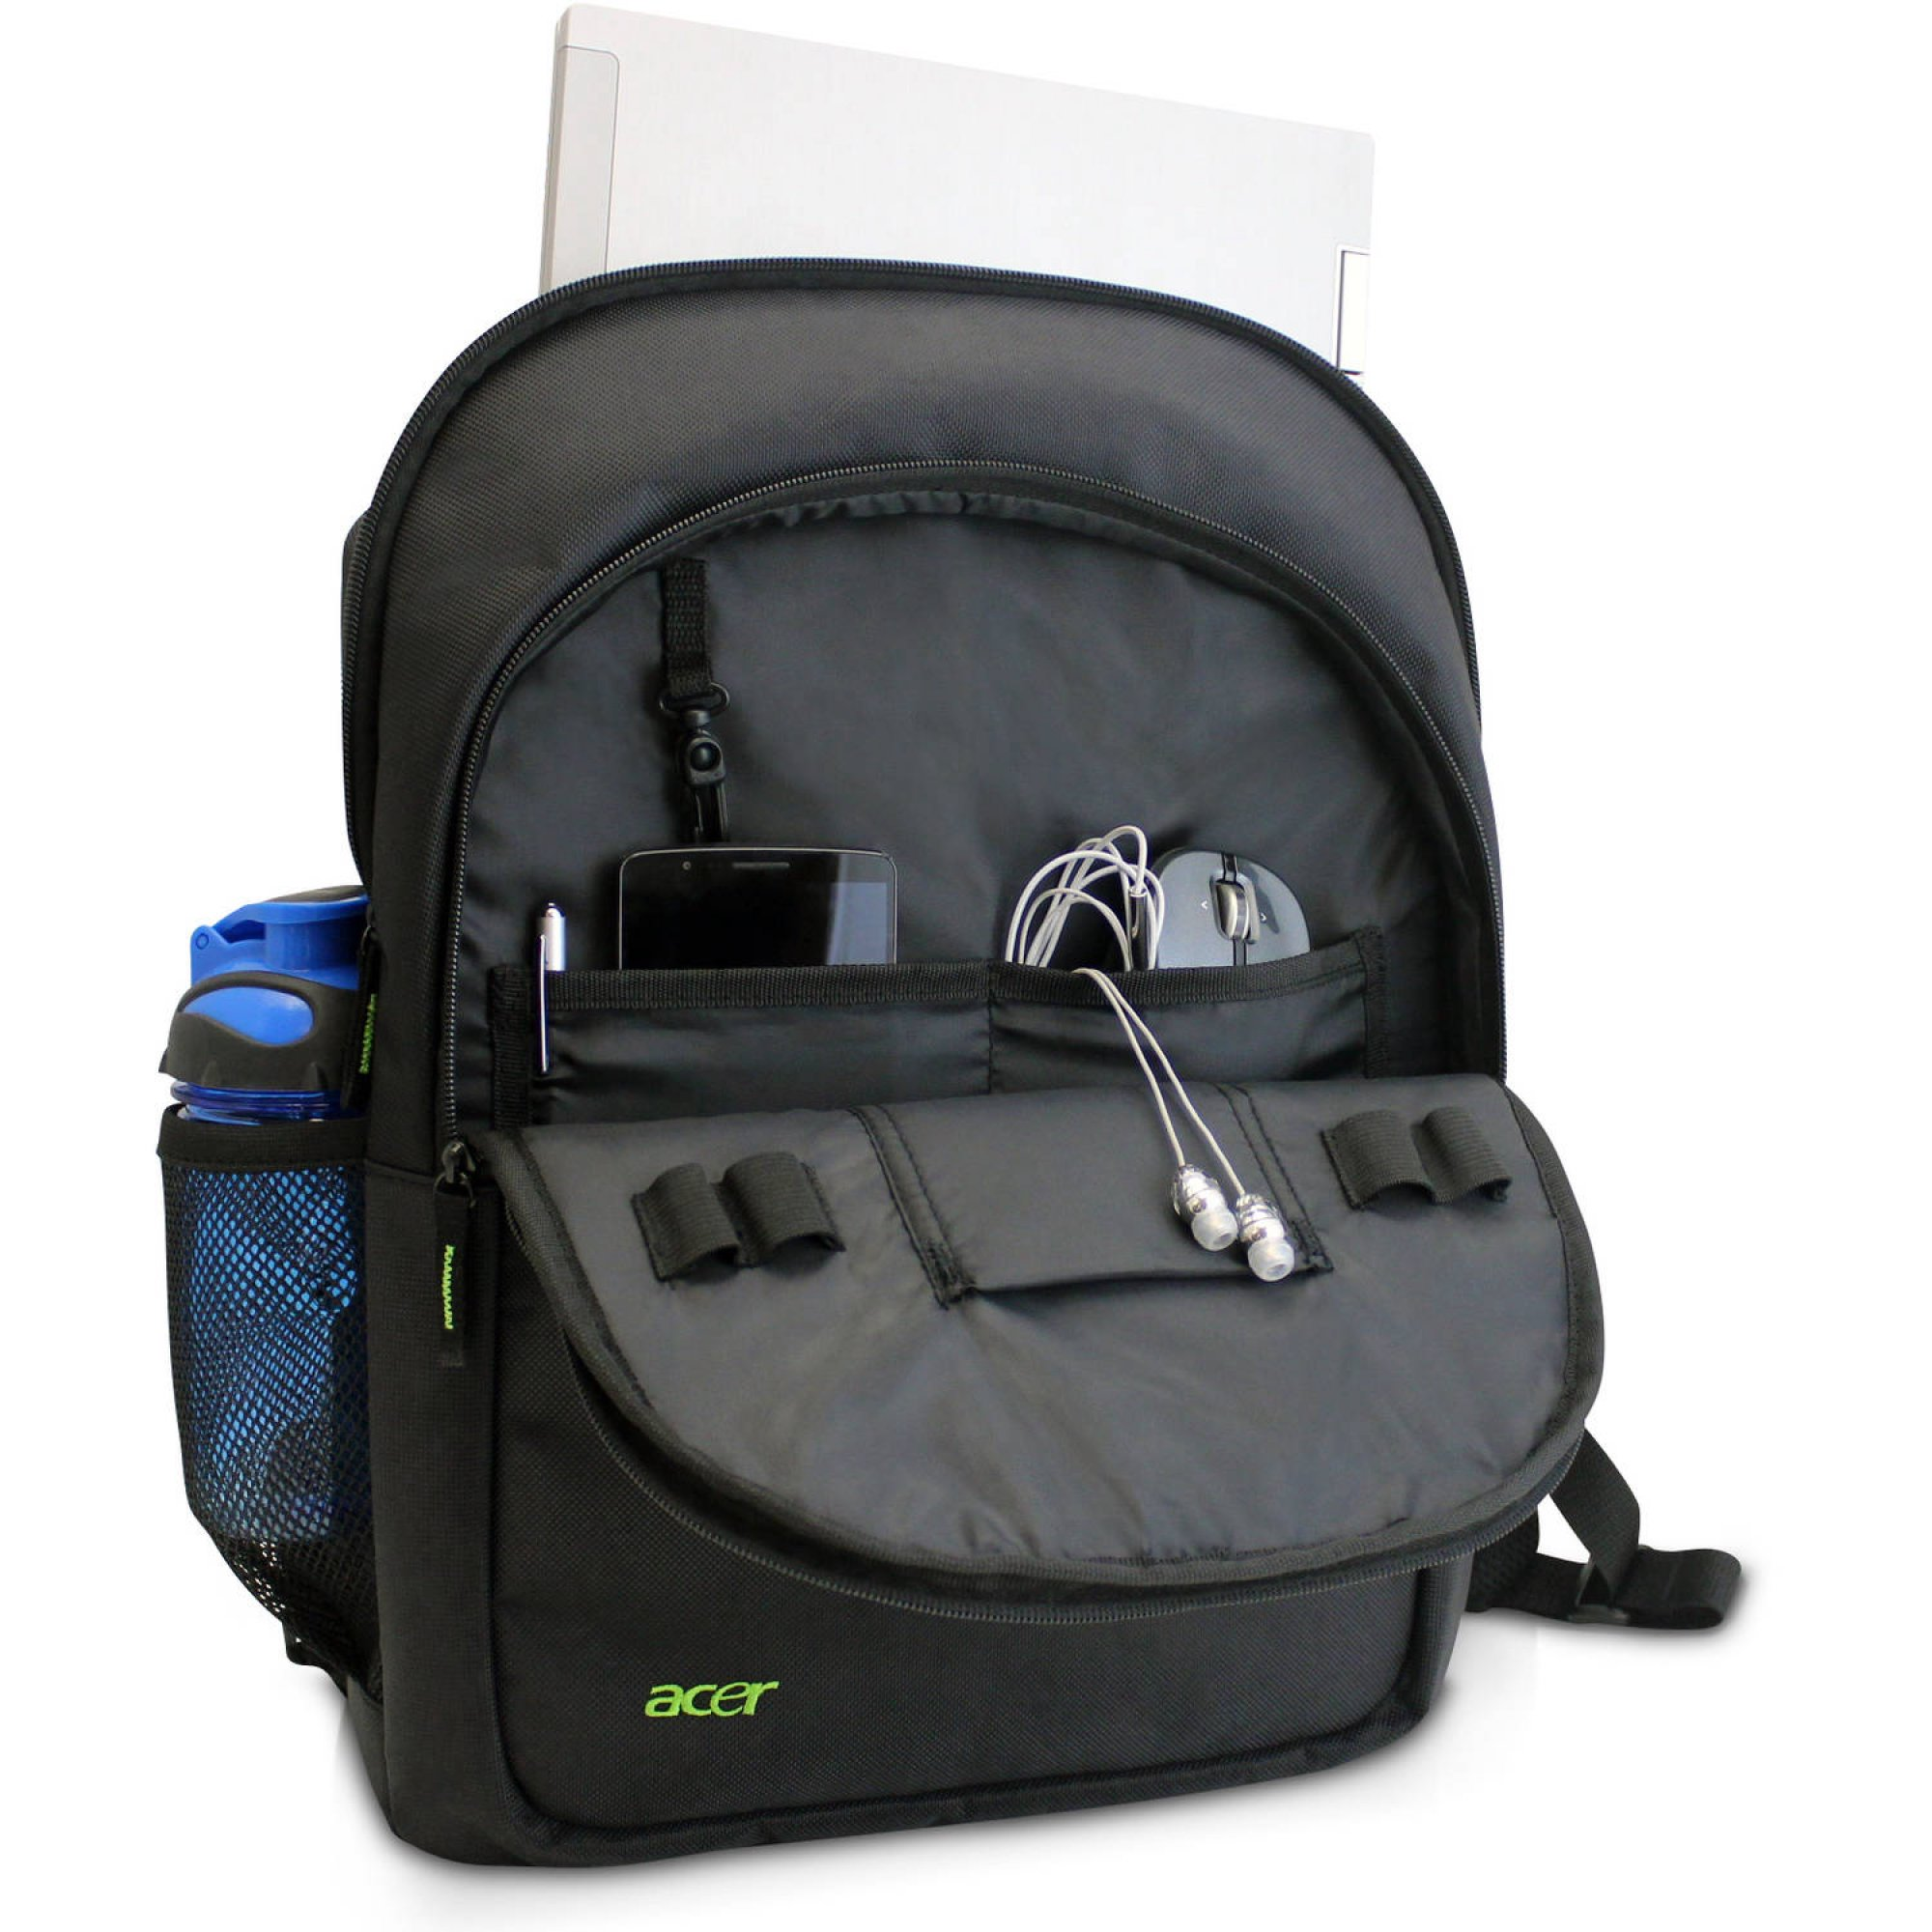 Acer 15.6″ Laptop Backpack Only $10.73 at Walmart! Plus FREE In-Store Pick Up! (Reg $21.15)